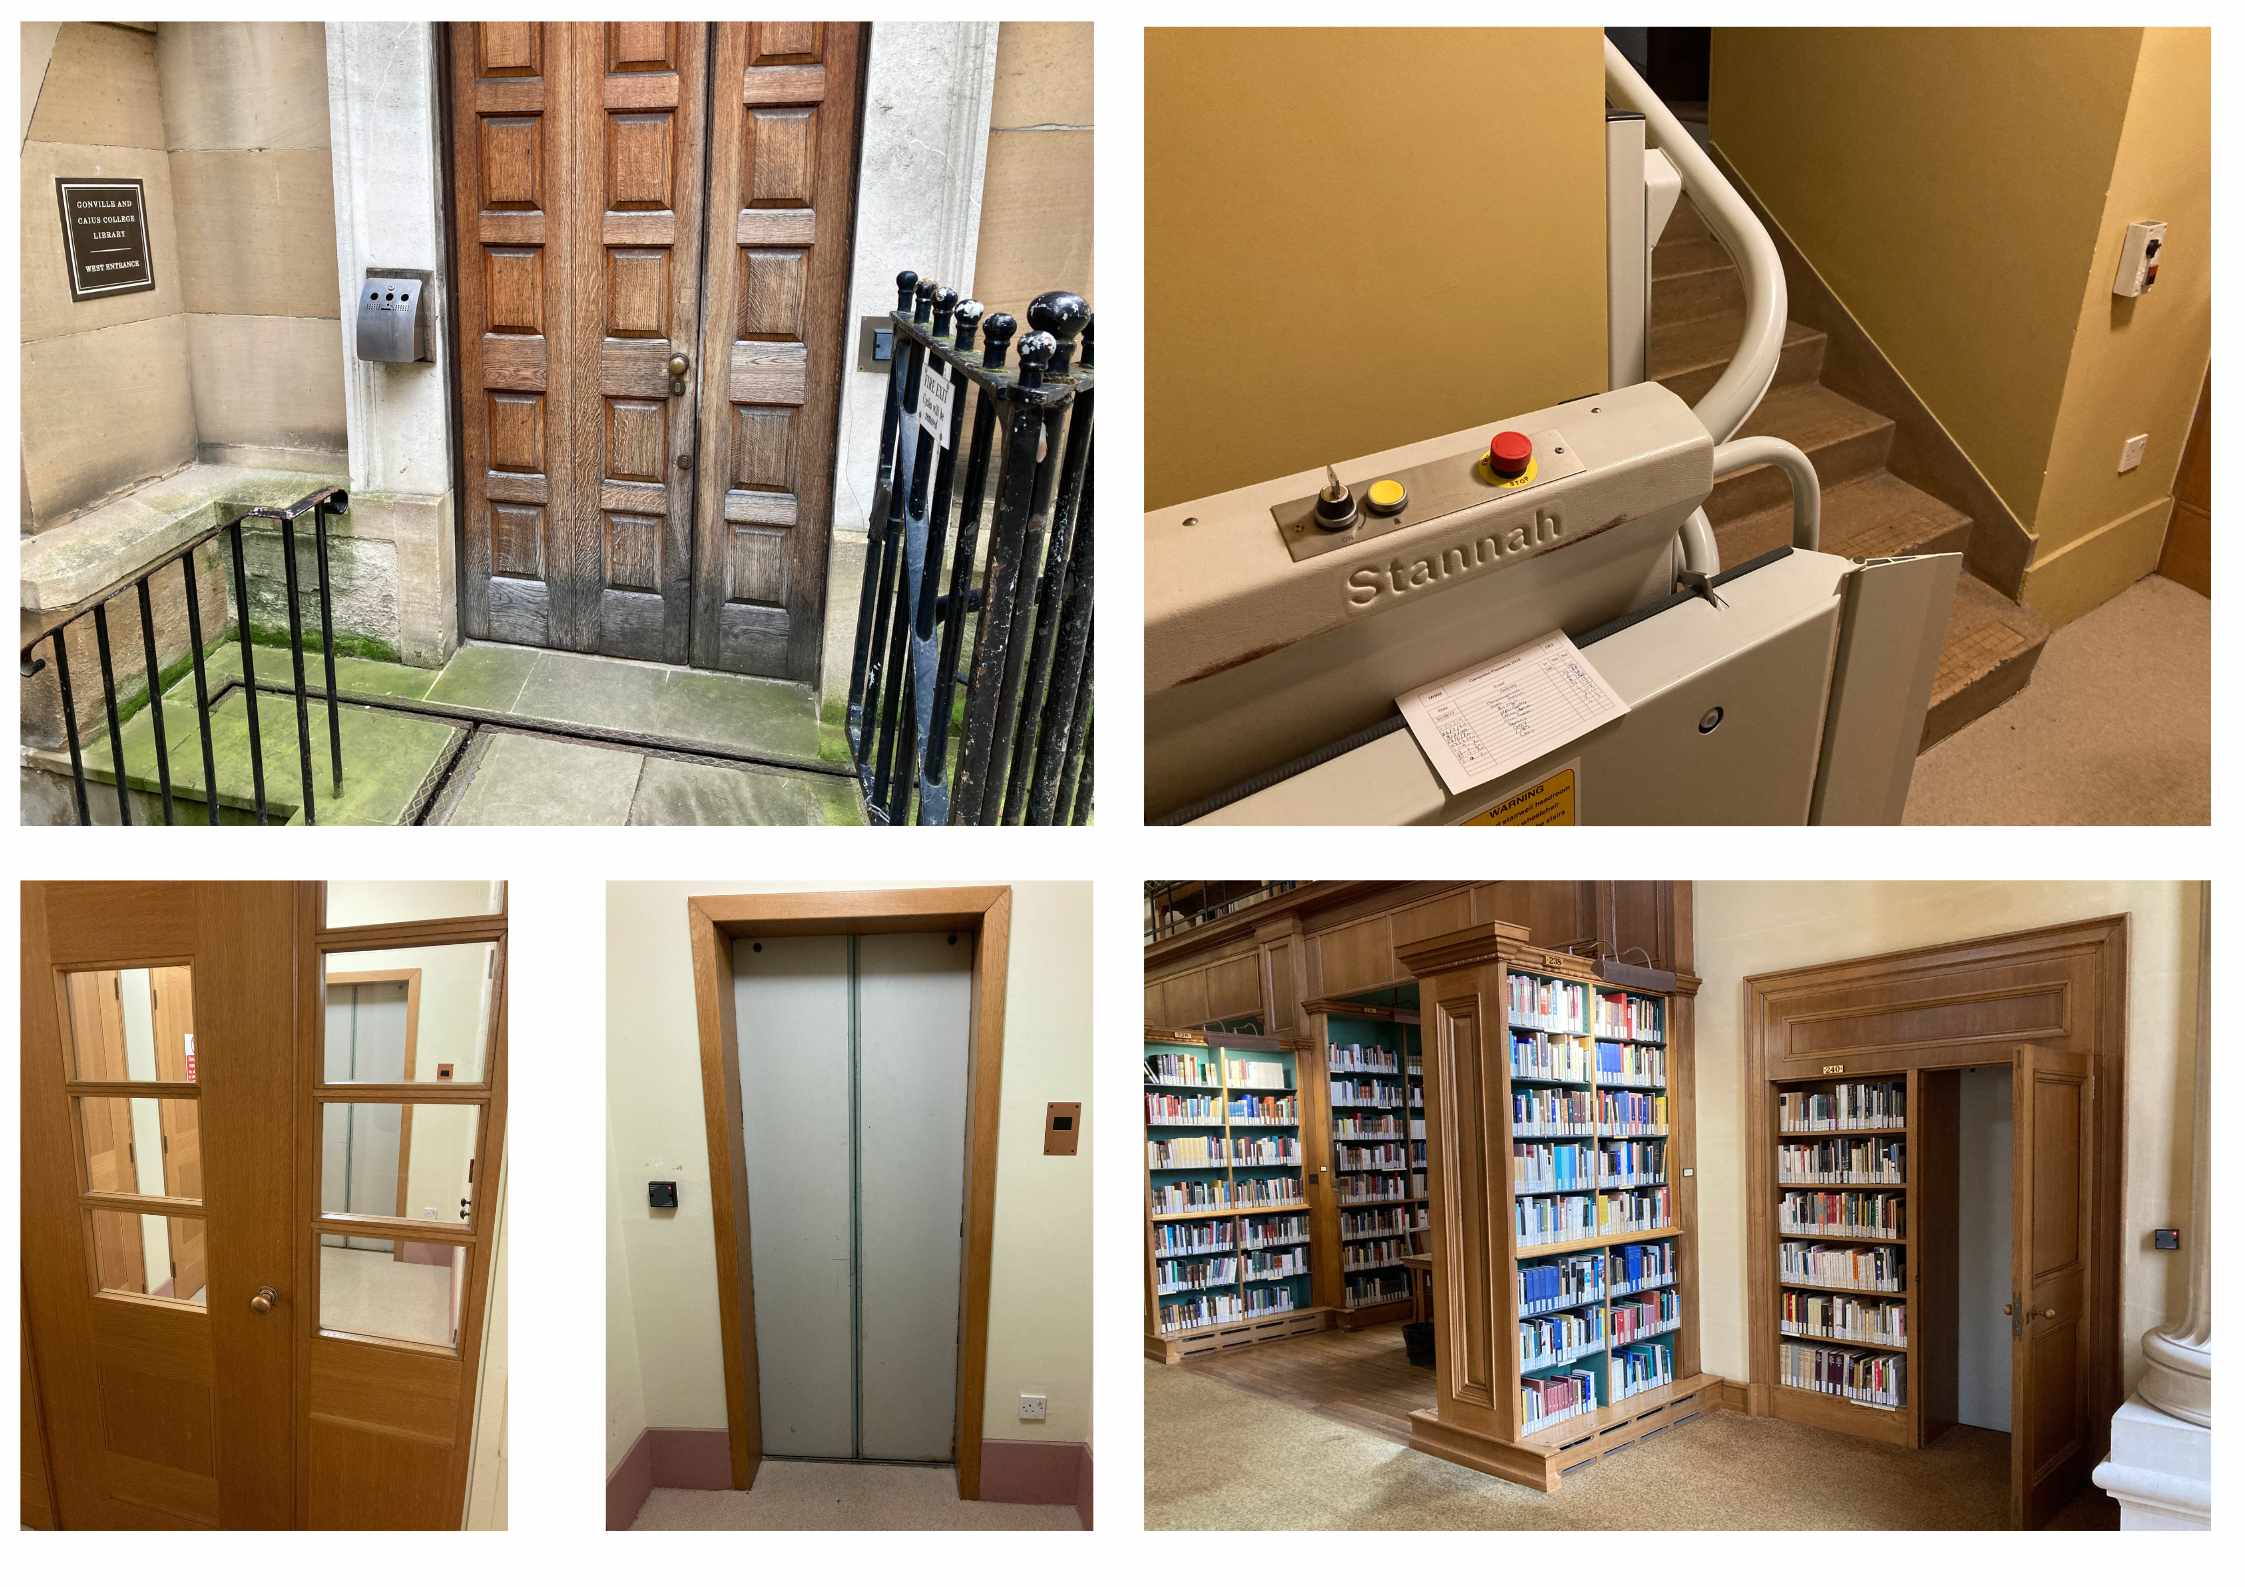 A montage of access to the Caius Library, featuring doors, elevator doors and levels